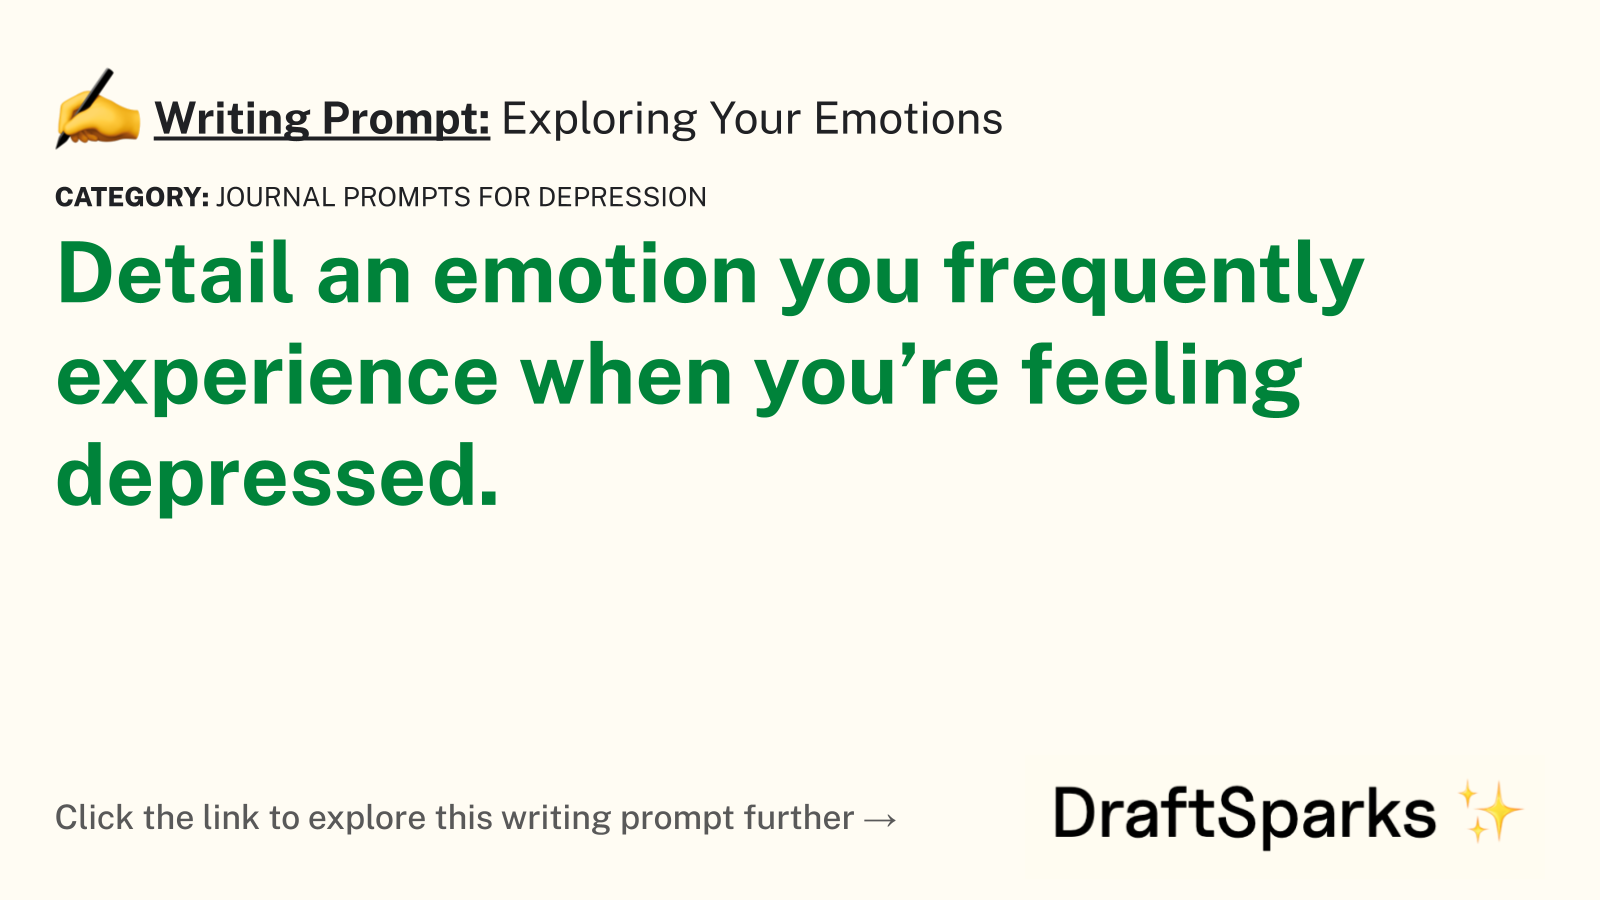 Exploring Your Emotions